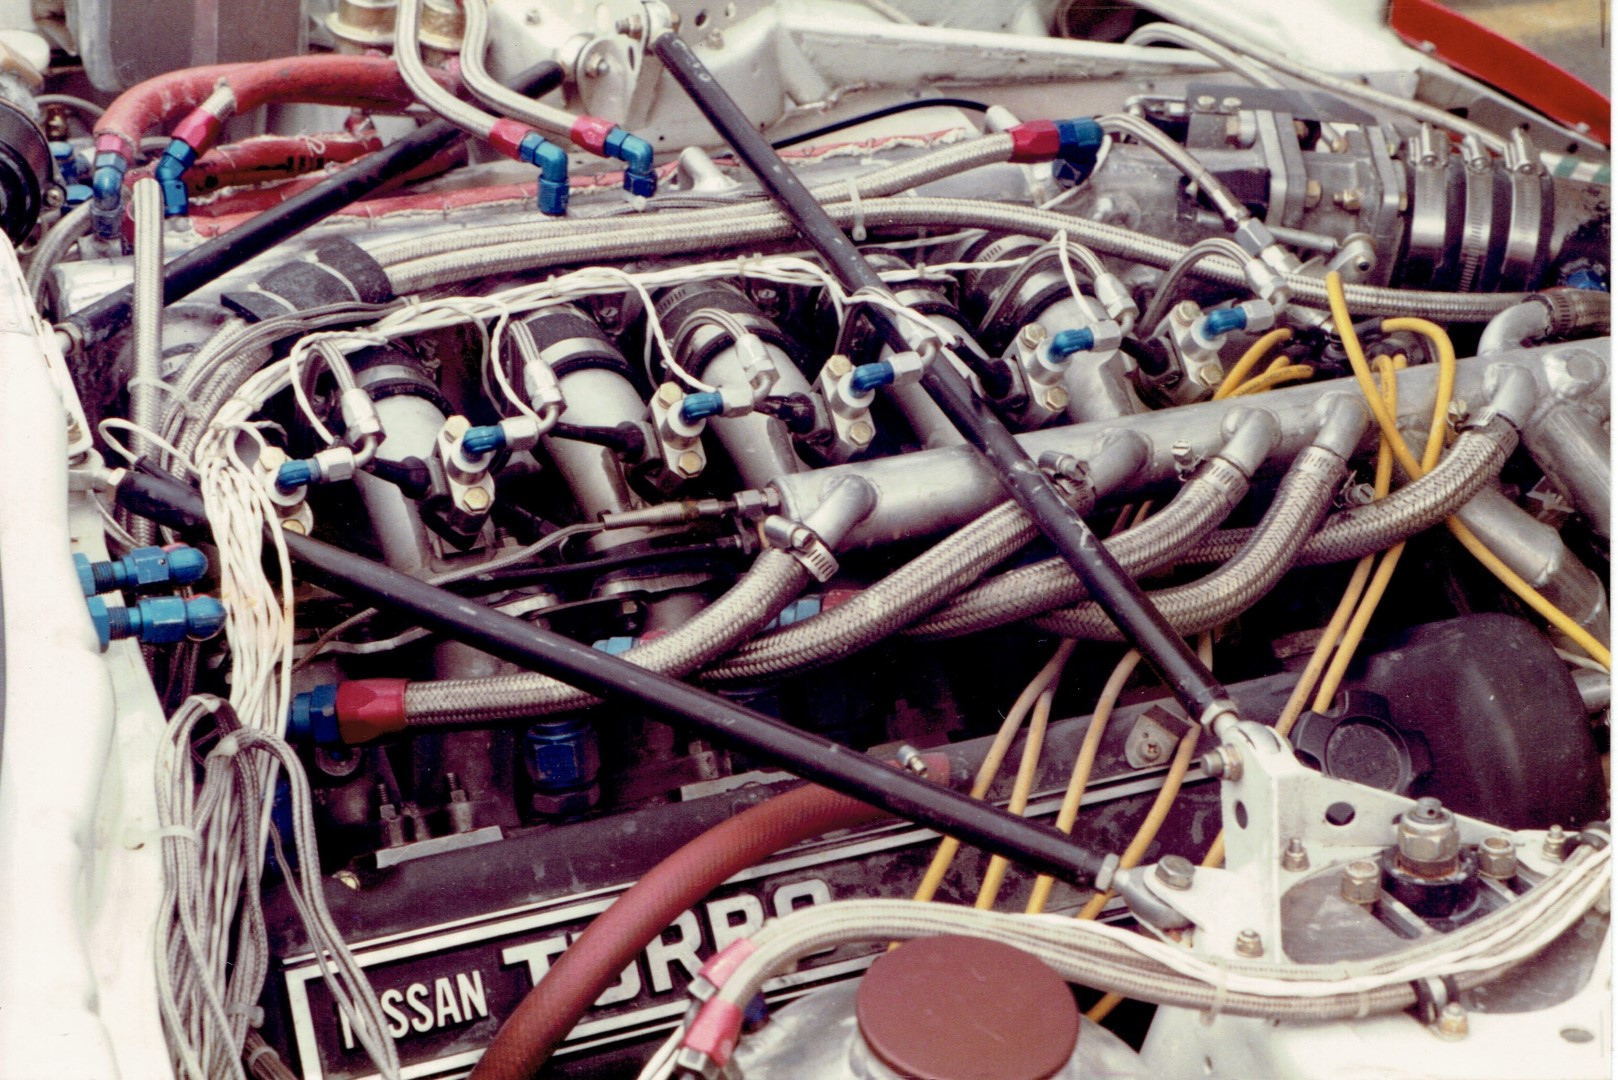 Don's motor, notice how far it is laid over, he said it made almost 600HP.